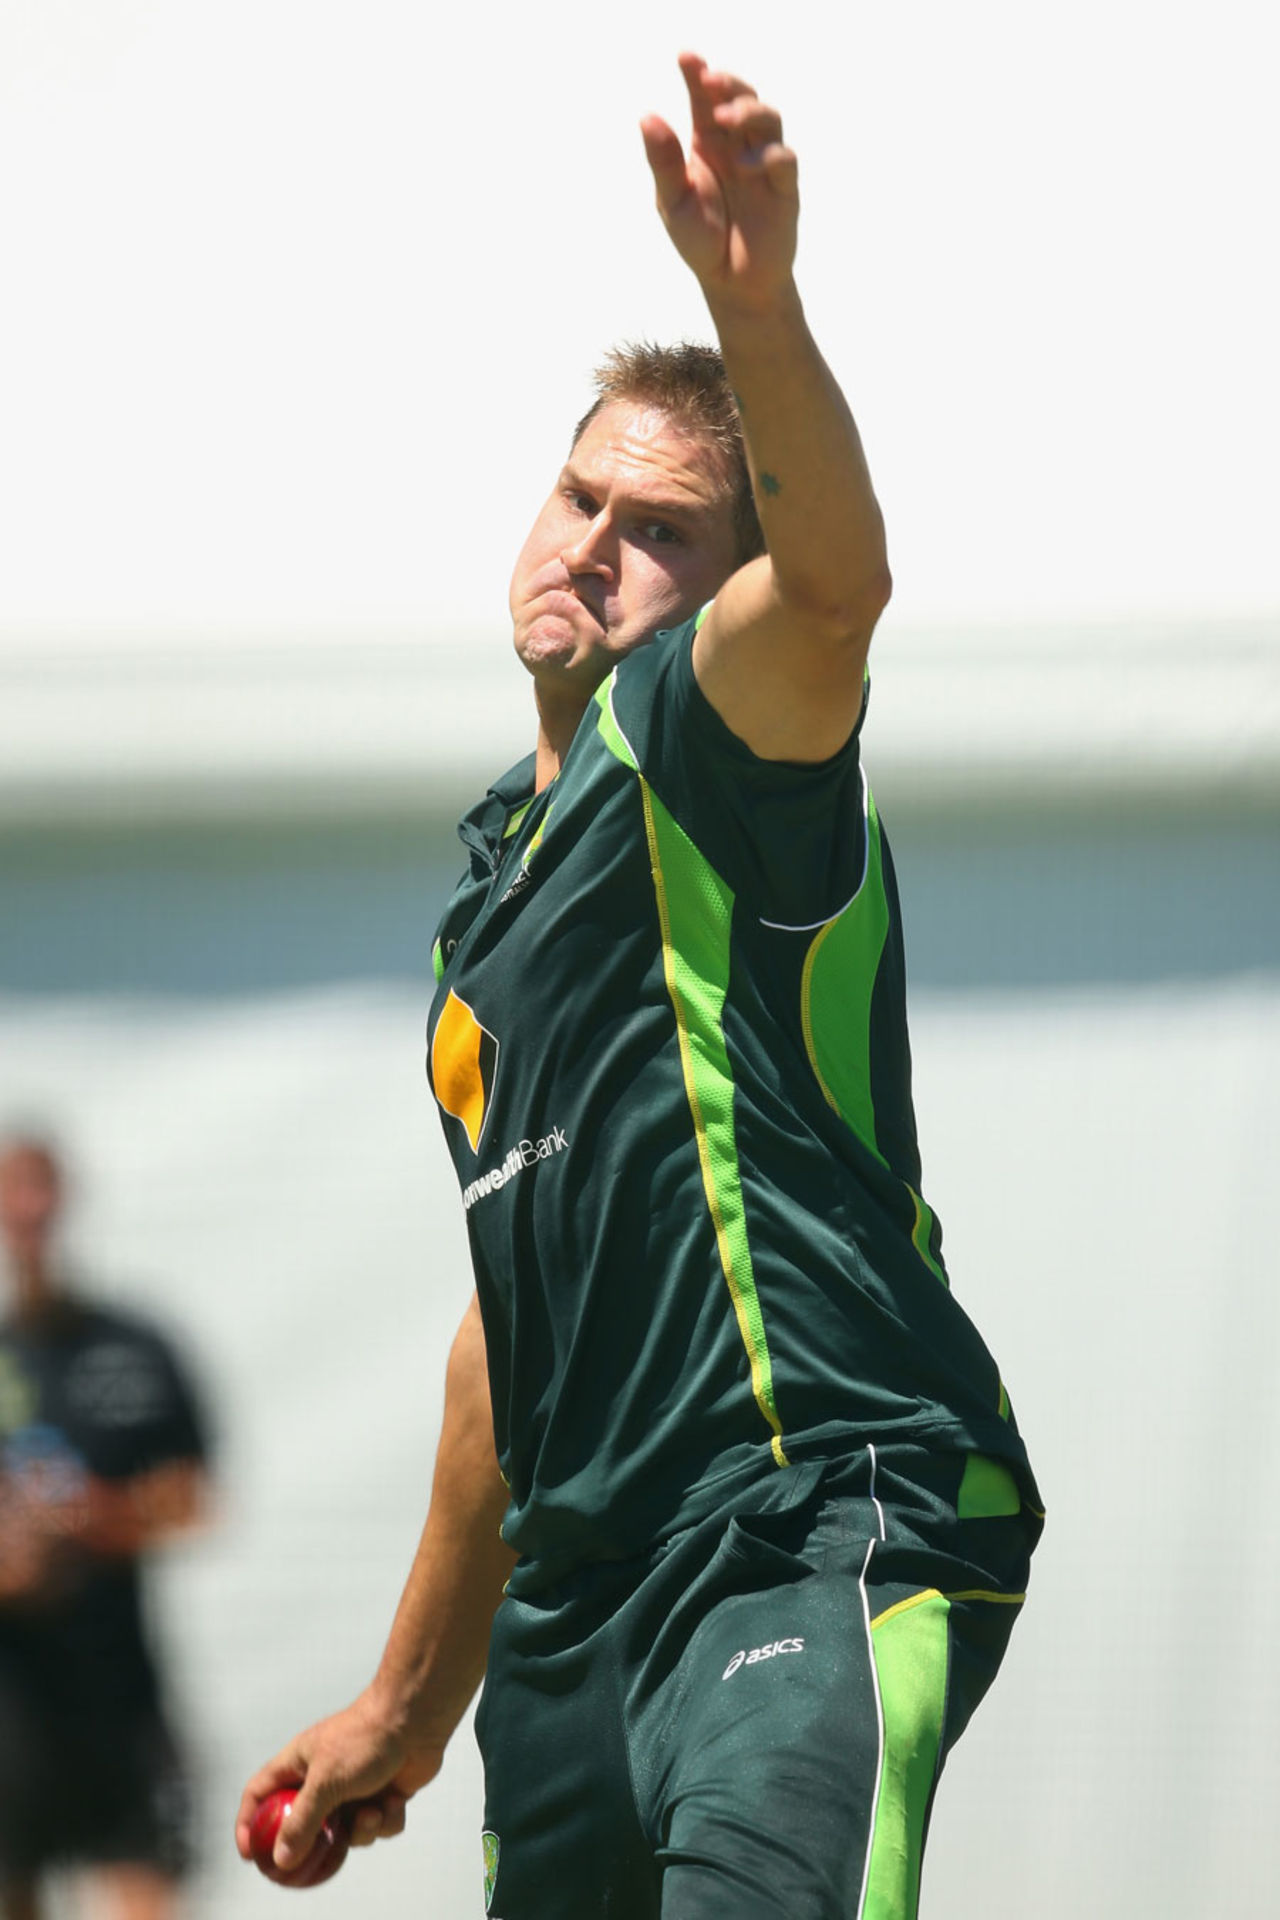 Ryan Harris bowls during a practice session, Australia v England, 3rd Test, Perth, December 12, 2013